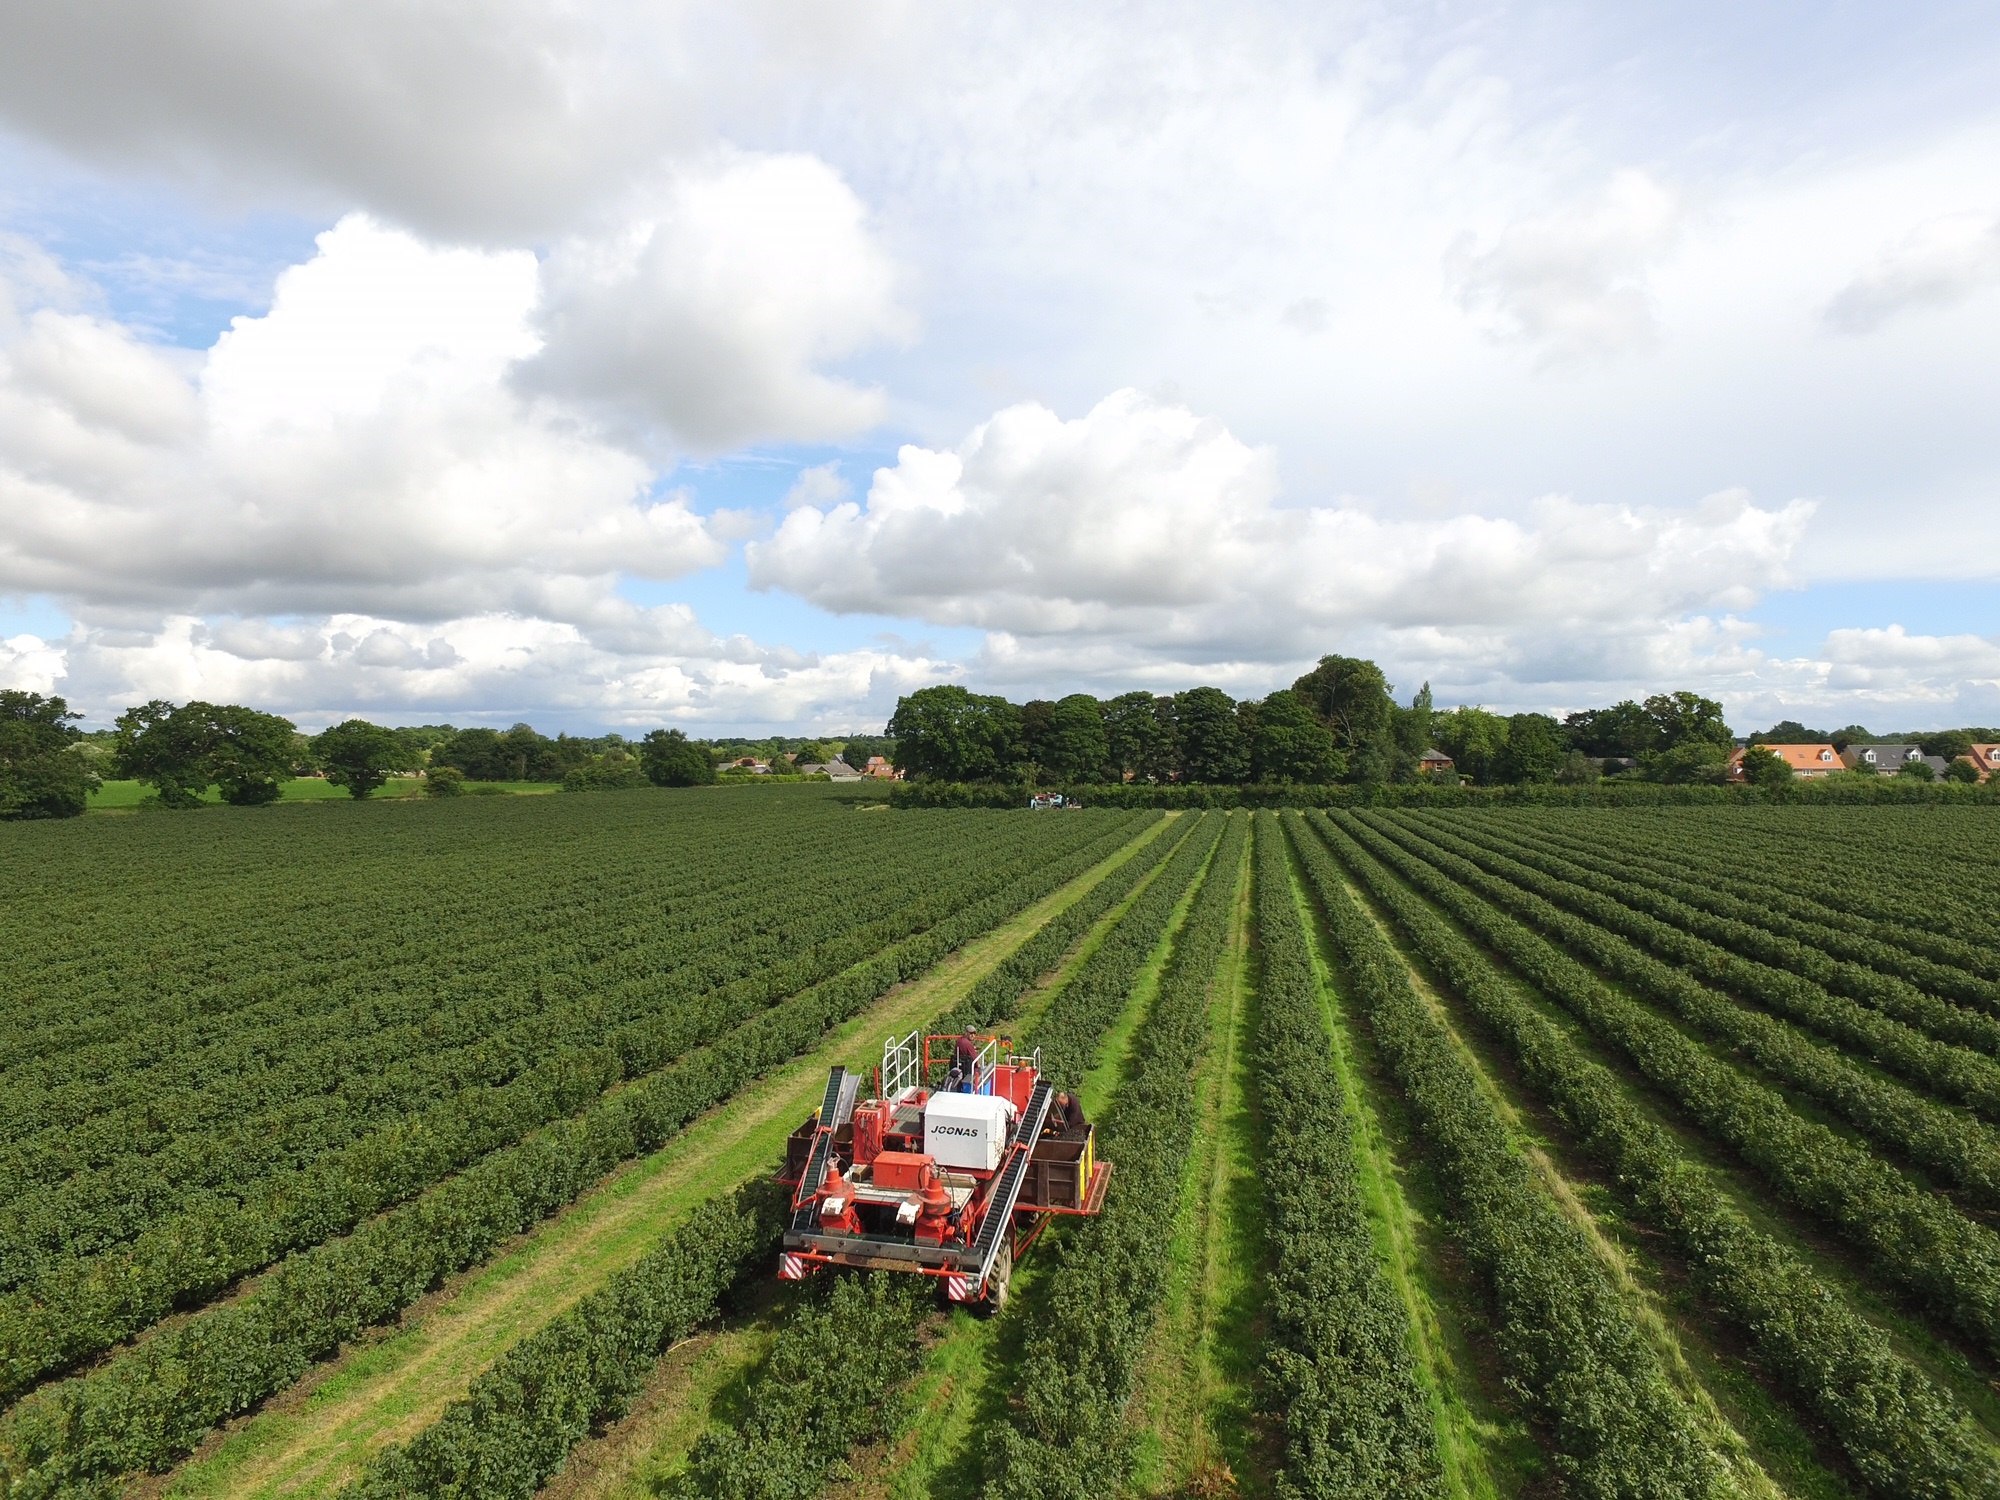 Blackcurrant harvesting takes place in July and August